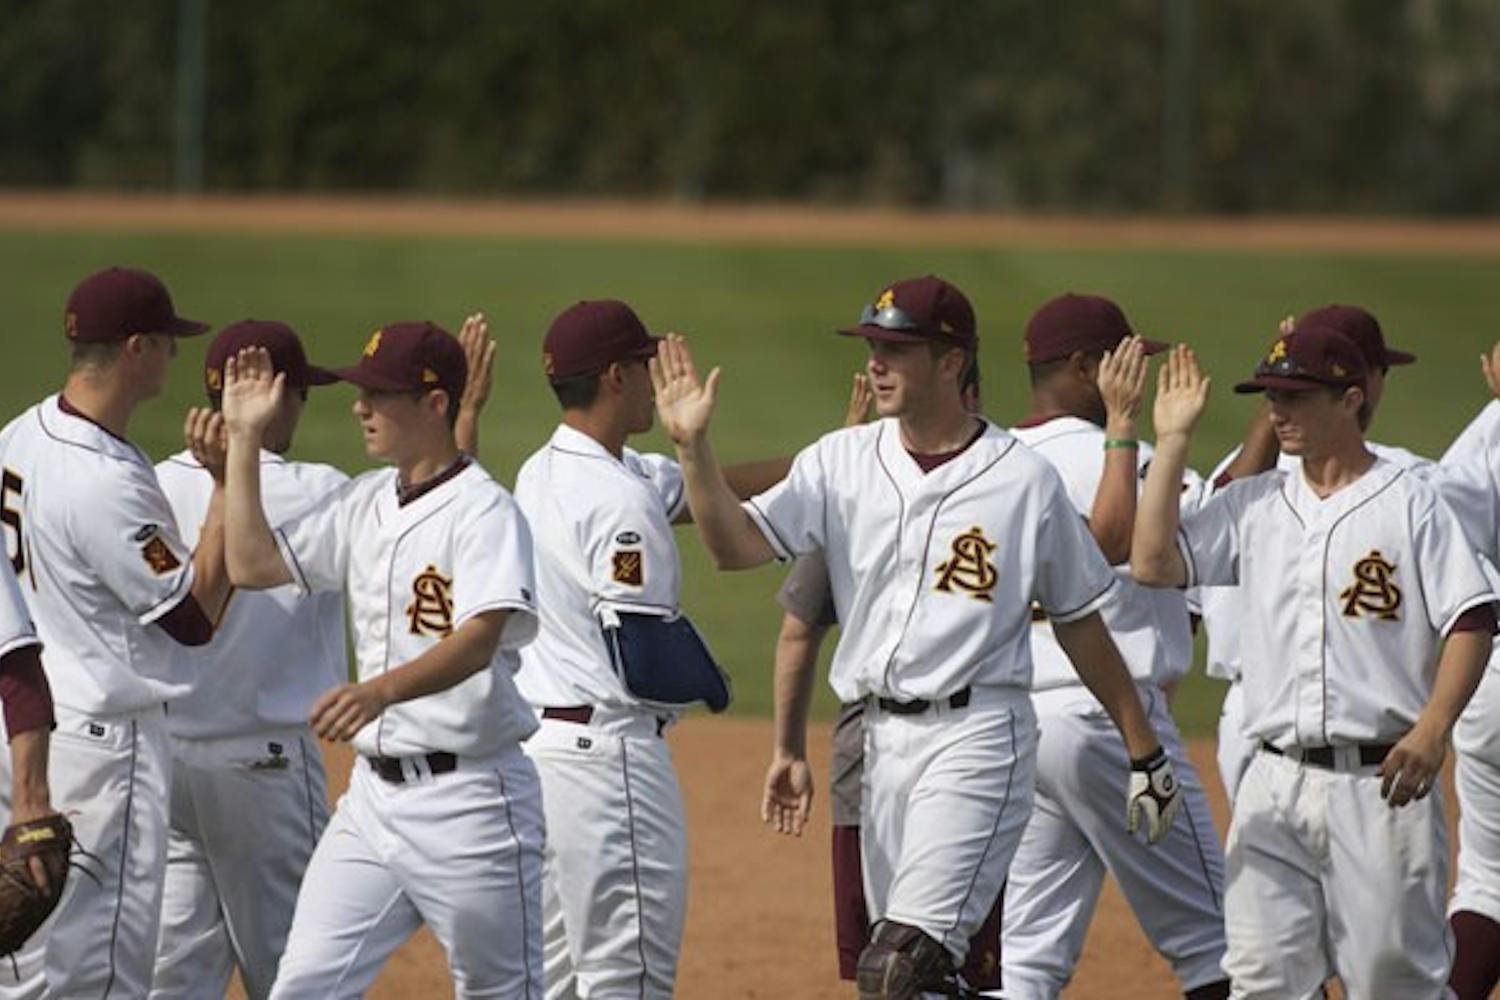 STILL PERFECT: The ASU baseball team celebrates after its 6-0 win over Houston on Saturday at Packard Stadium. The Sun Devils also beat Houston 6-5 on Sunday to push their record to 20-0 to start the season. (Photo by Scott Stuk)